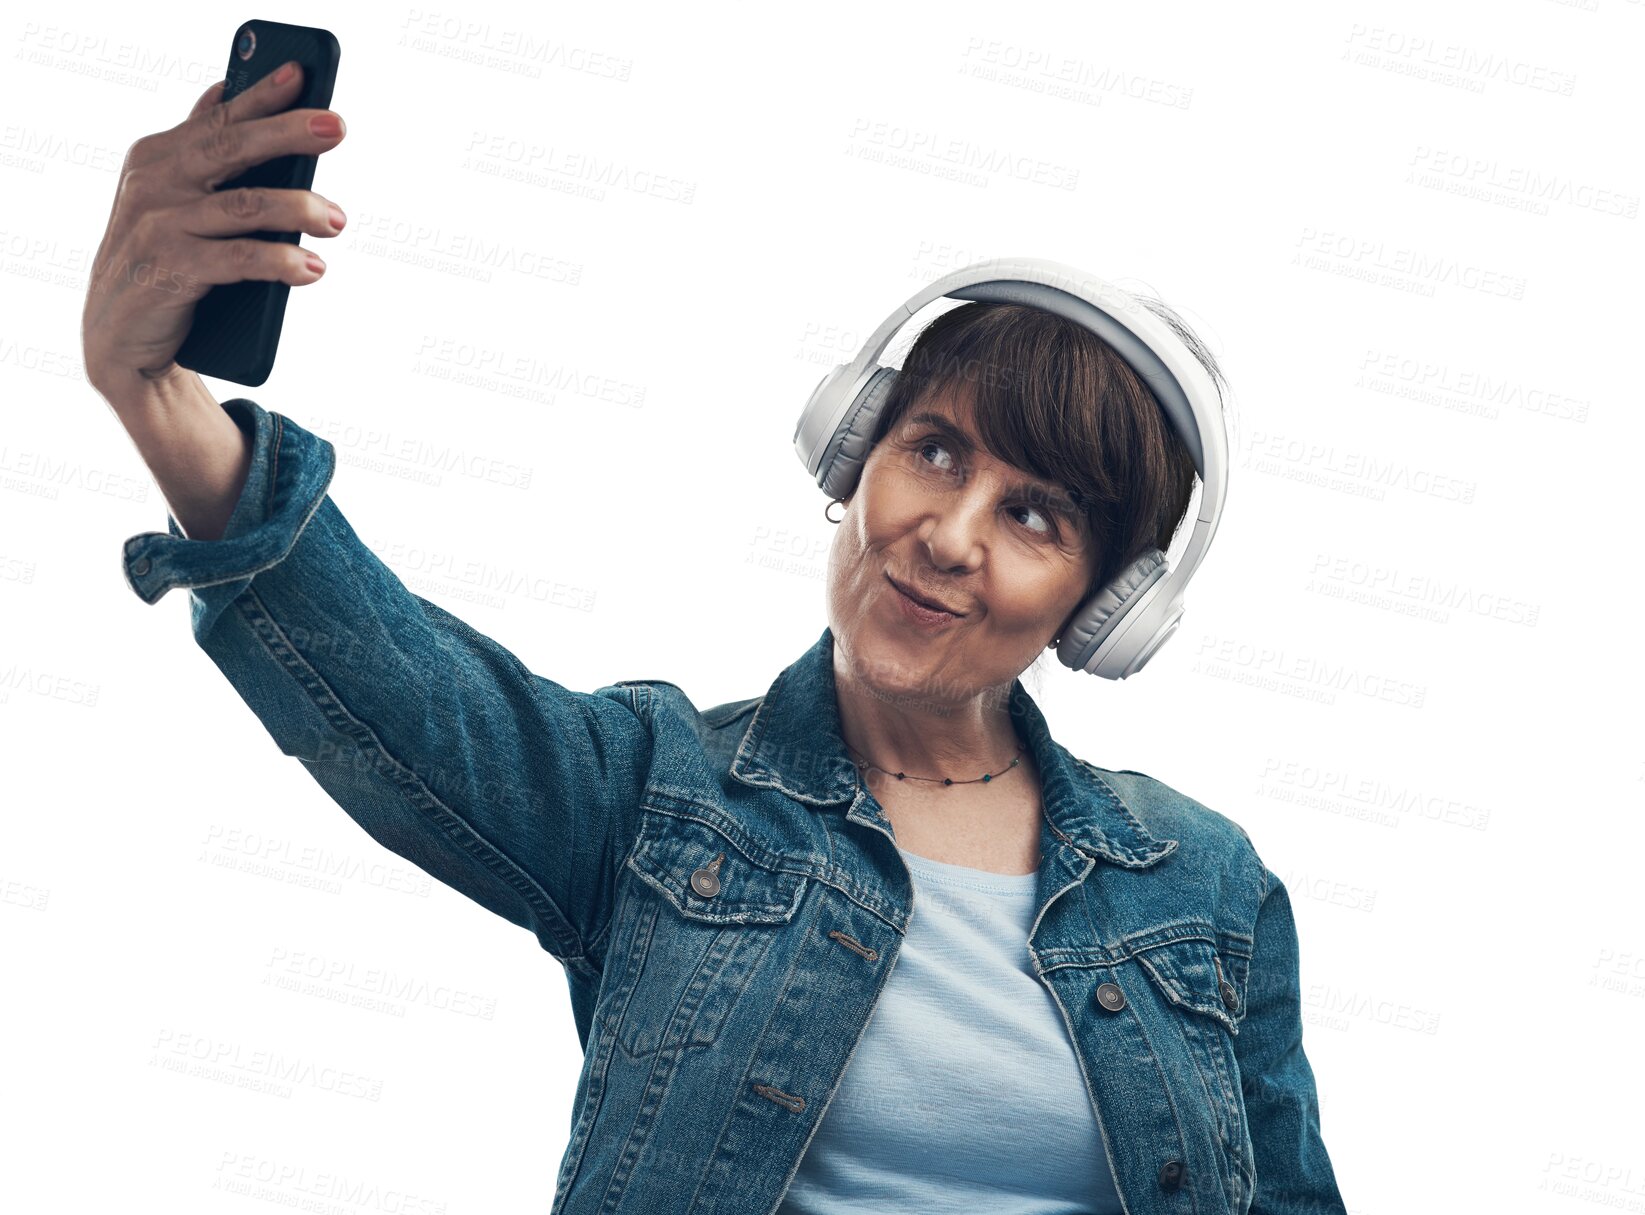 Buy stock photo Isolated woman, selfie and headphones with smile, pouting or kiss for blog by transparent png background. Senior influencer lady, music and photography for social network app, profile picture or post